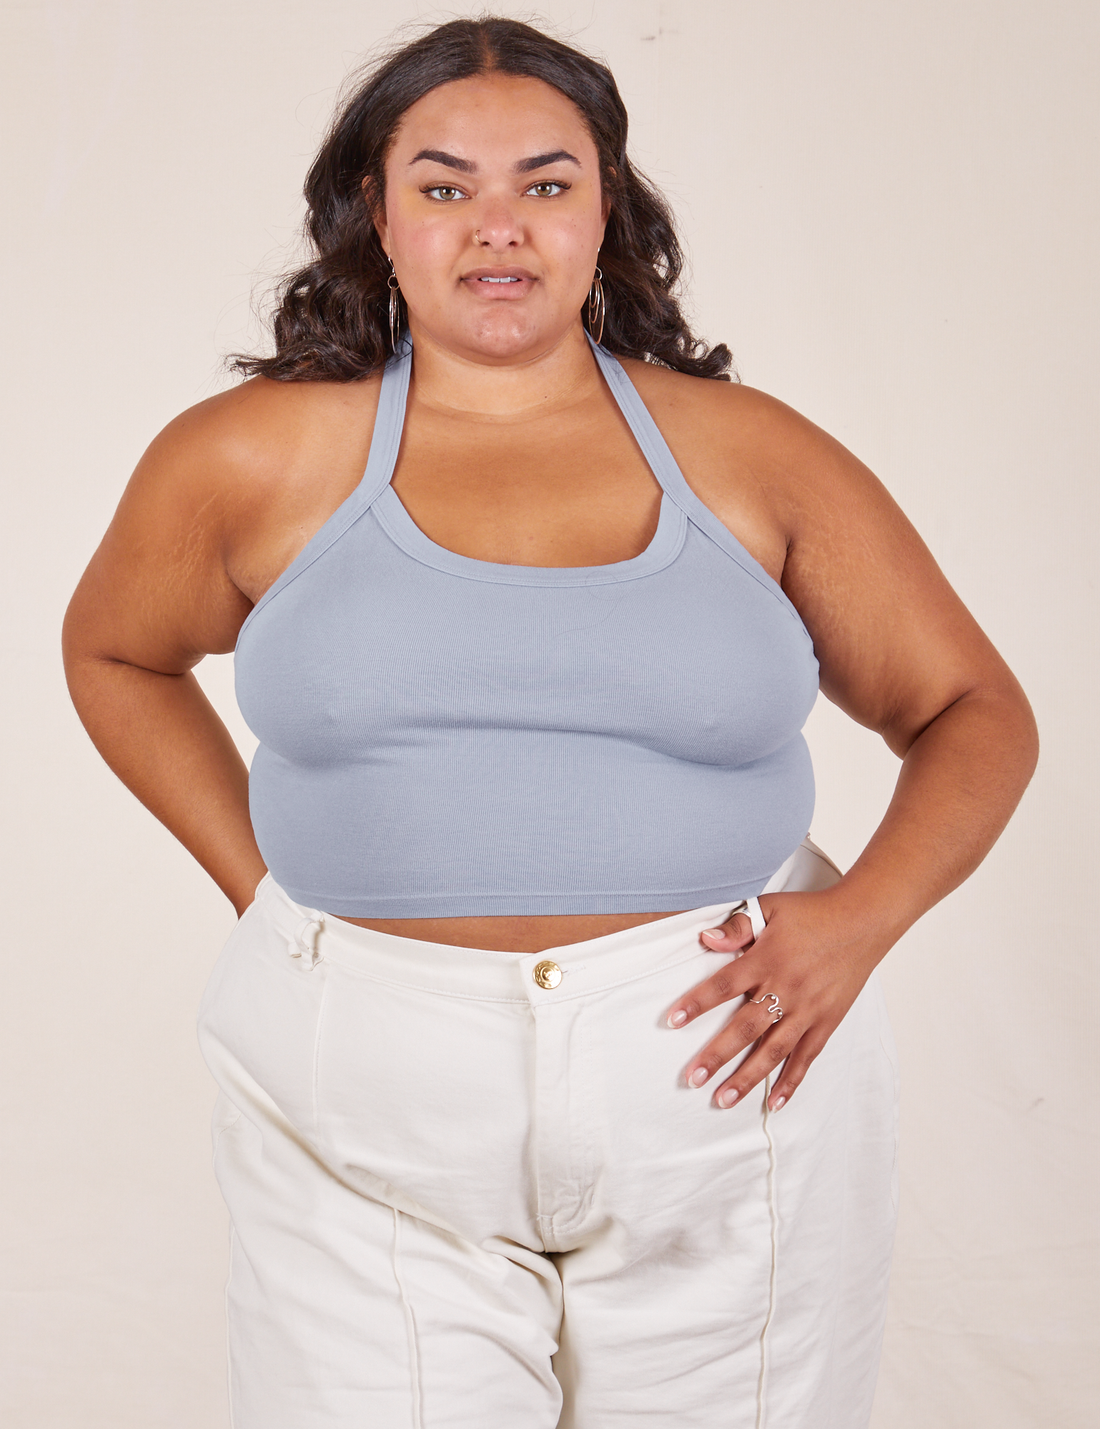 Alicia is 5'9" and wearing XL Halter Top in Periwinkle paired with vintage off-white Western Pants